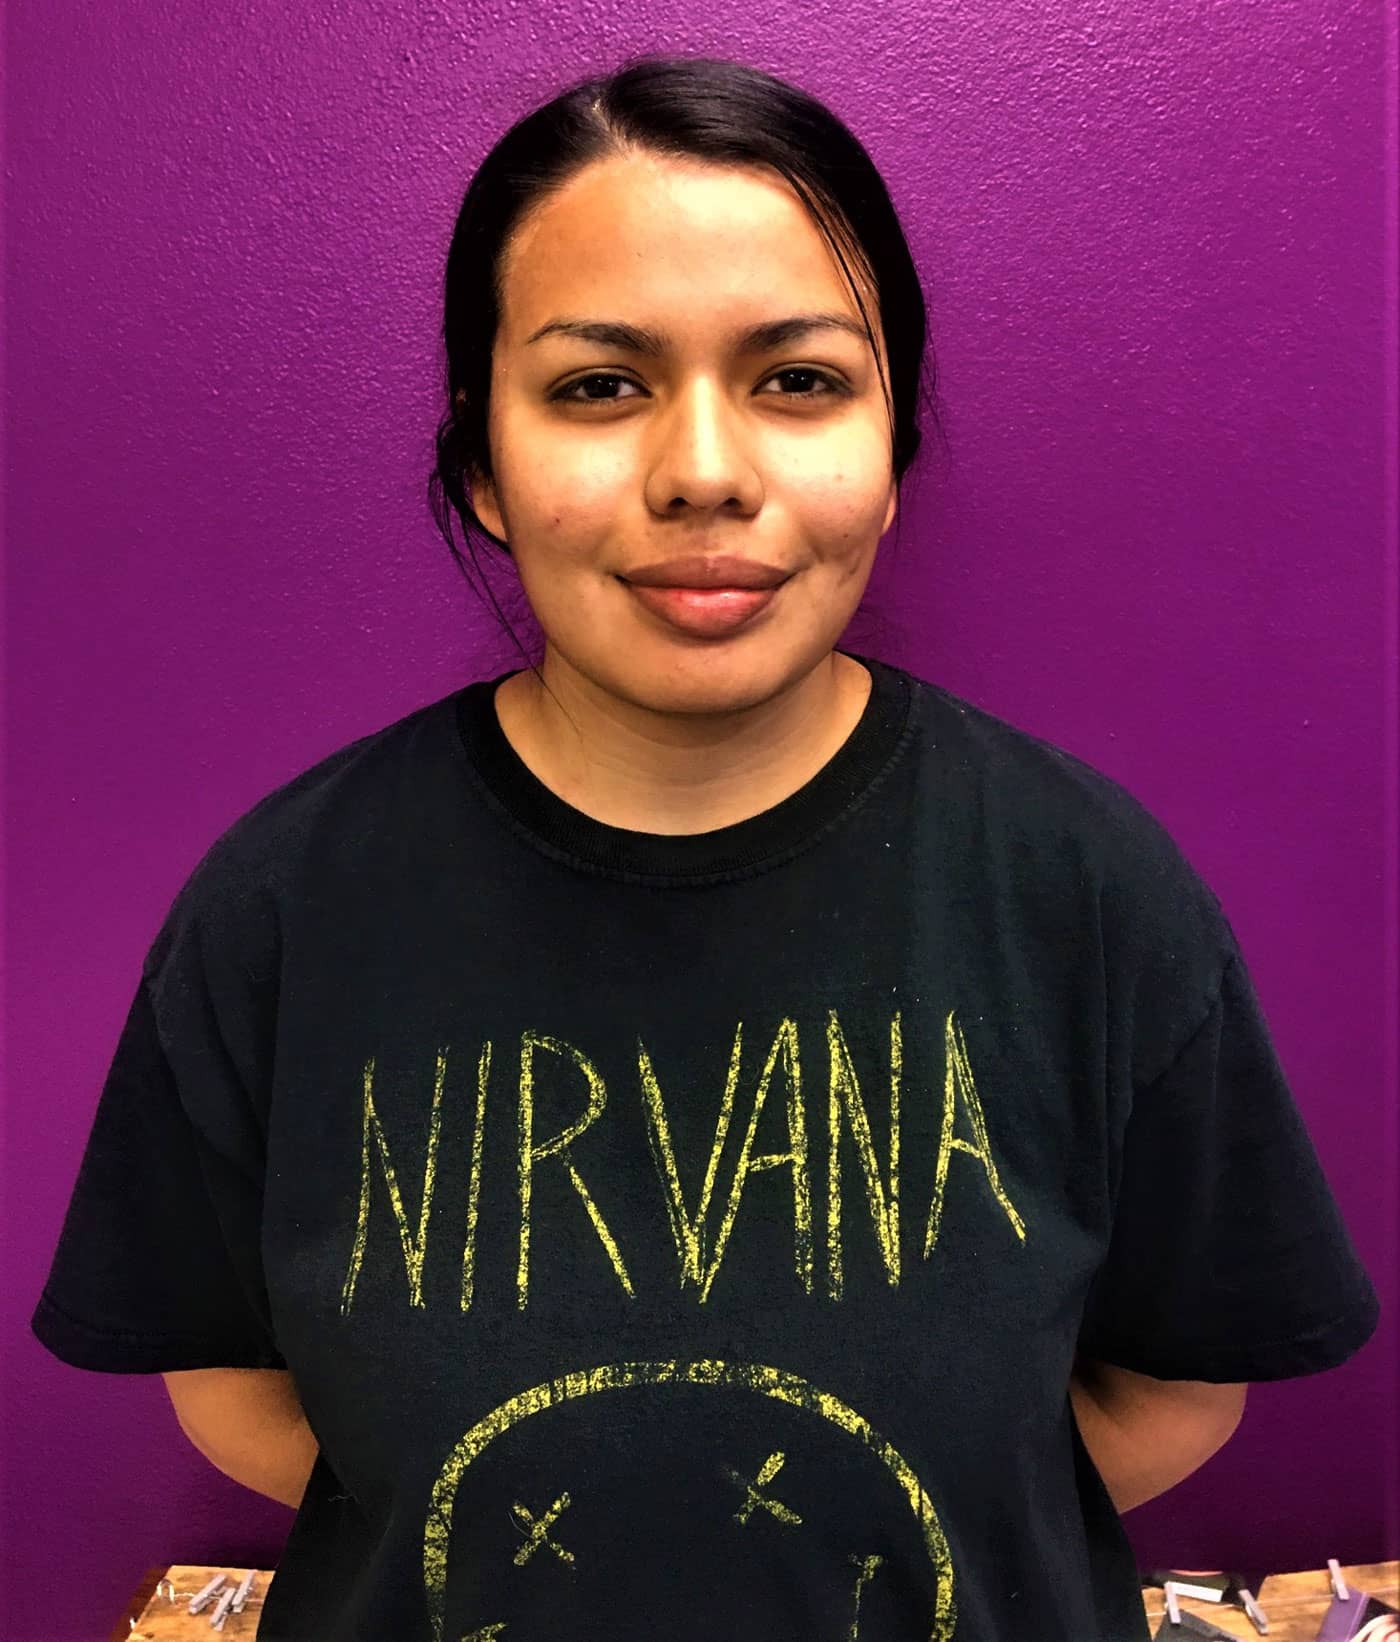 Deseraih “Desi” Subia - April 2022 Care Professional of the Month for Home Instead of Midland-Odessa